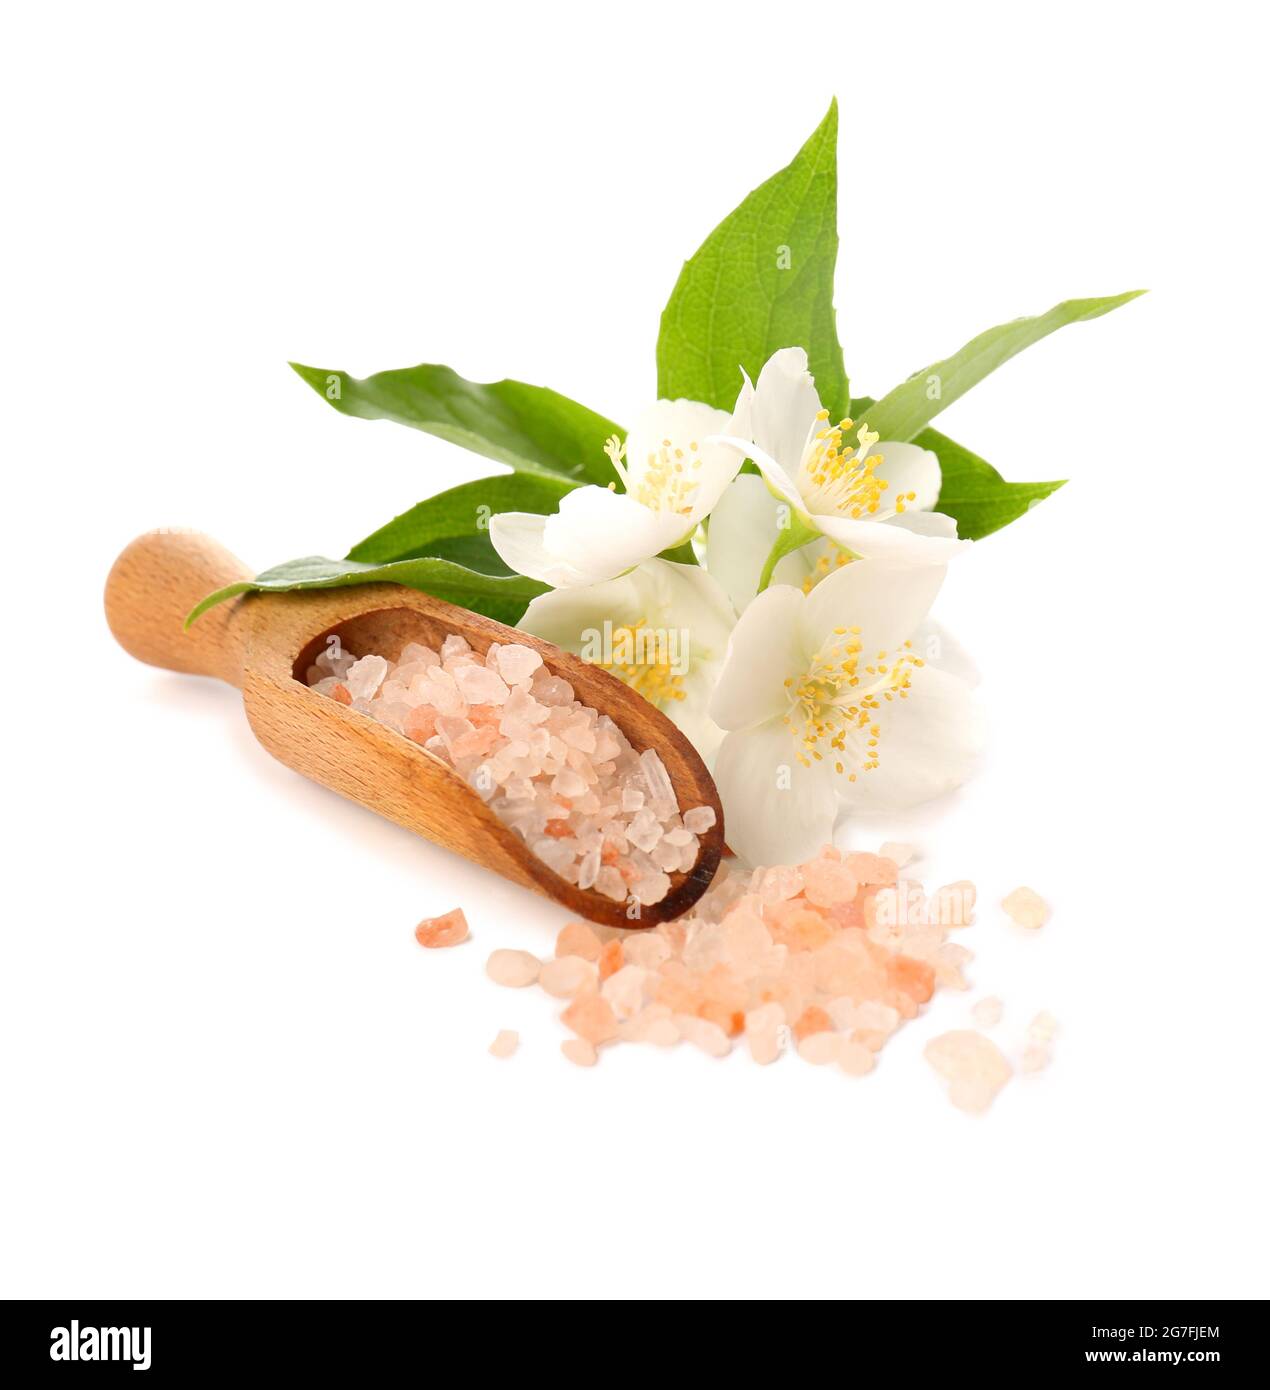 Scoop with sea salt and jasmine flowers on white background Stock Photo